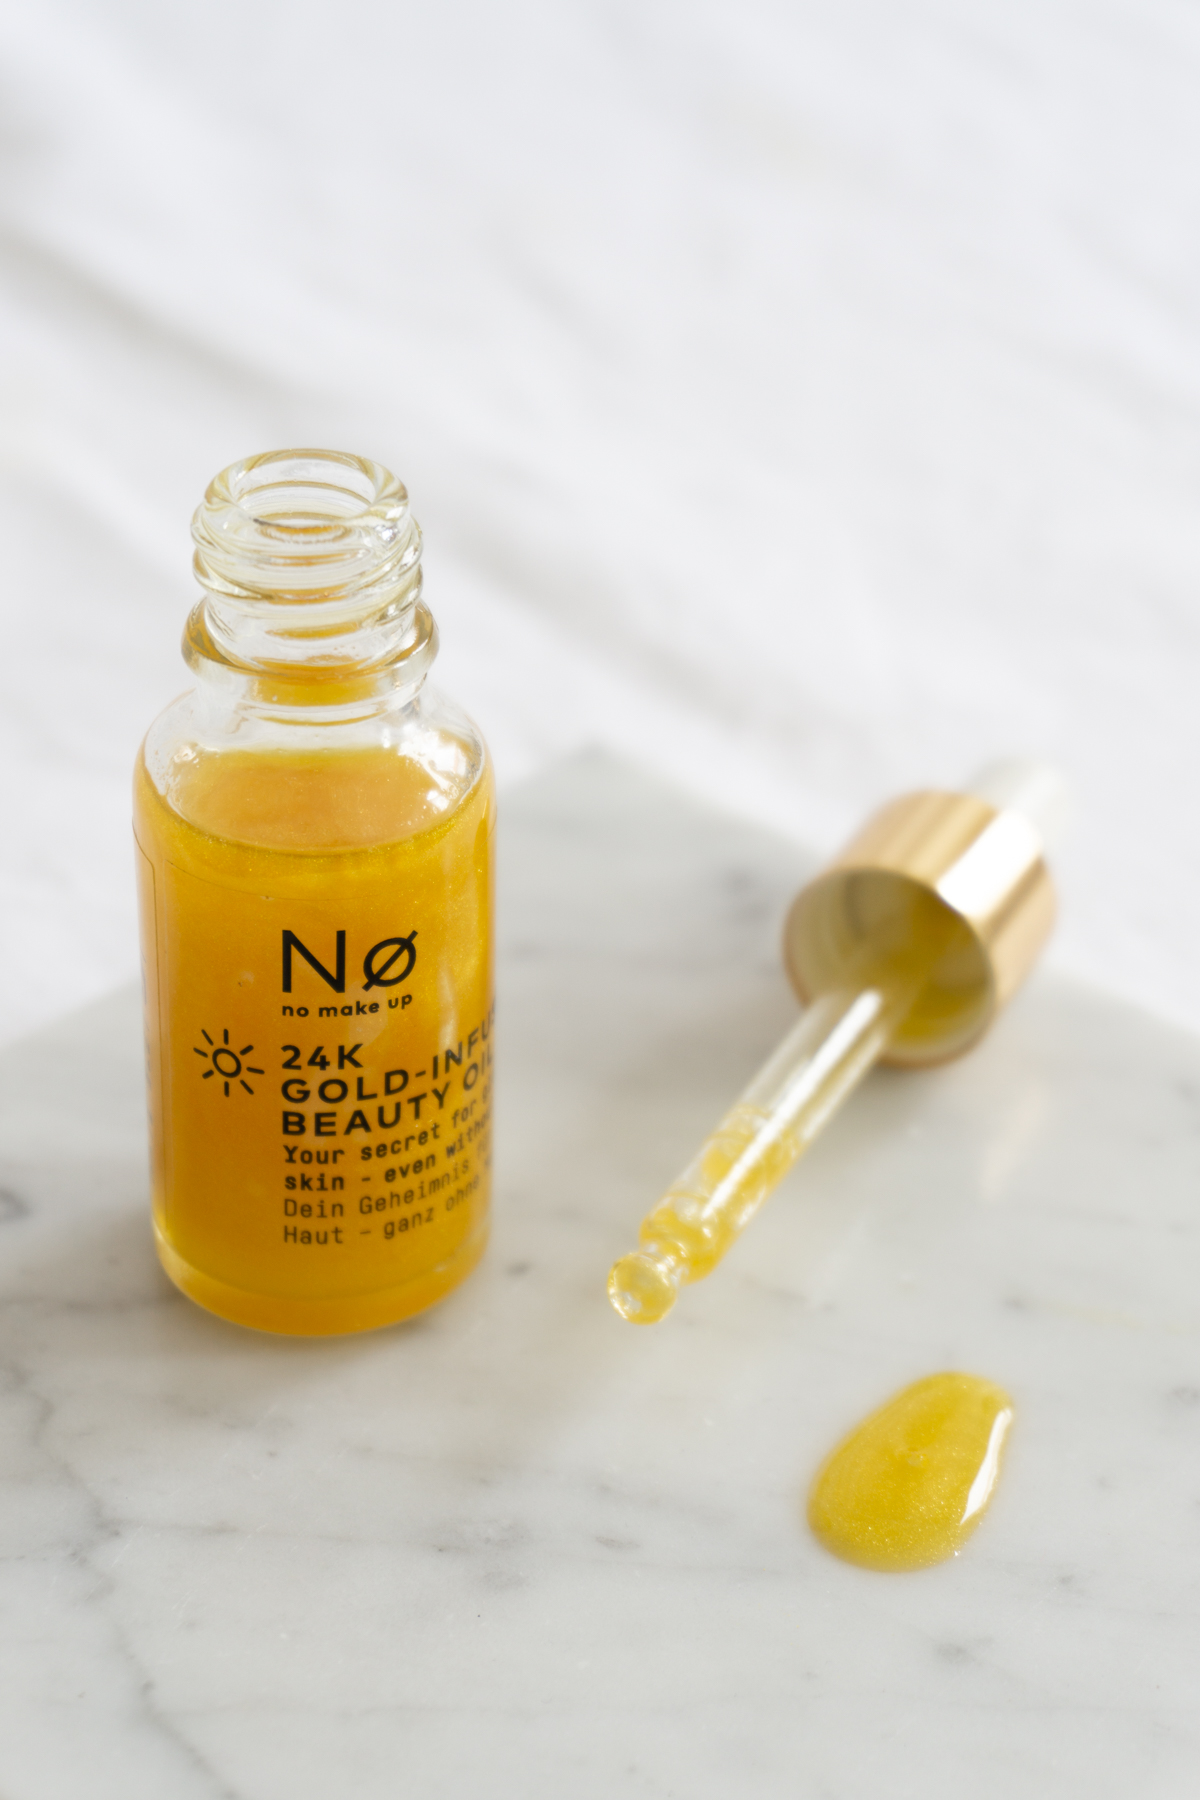 Beauty Photography - Nø Make Up Cosmetics - Natural Skin Care, Packaging Design / RG Daily Blog